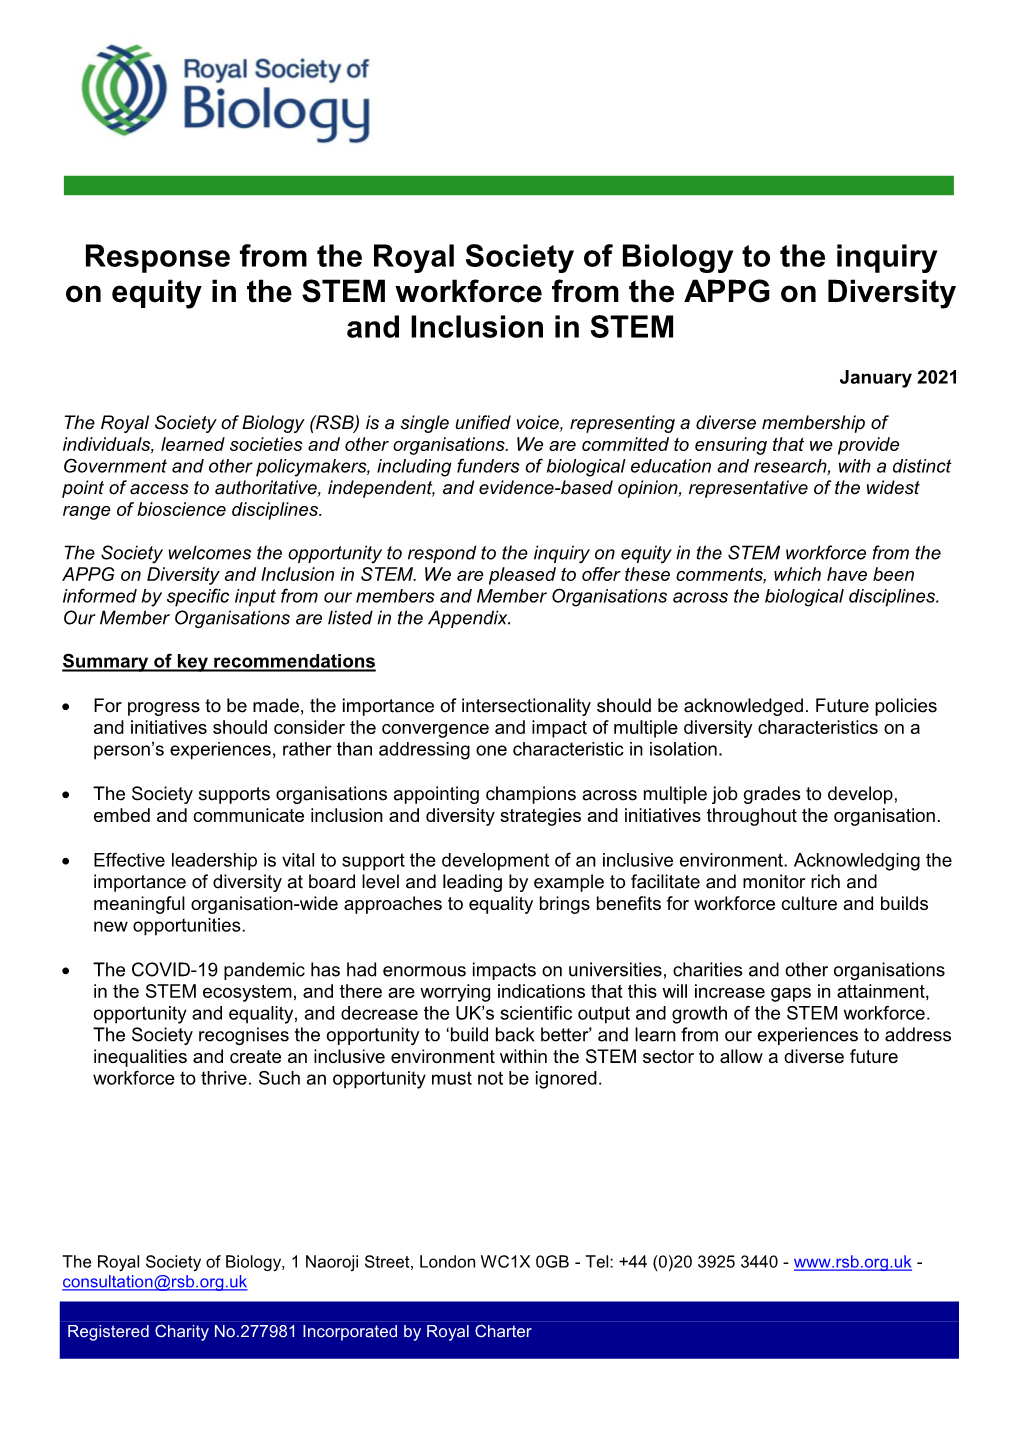 Response from the Royal Society of Biology to the Inquiry on Equity in the STEM Workforce from the APPG on Diversity and Inclusion in STEM